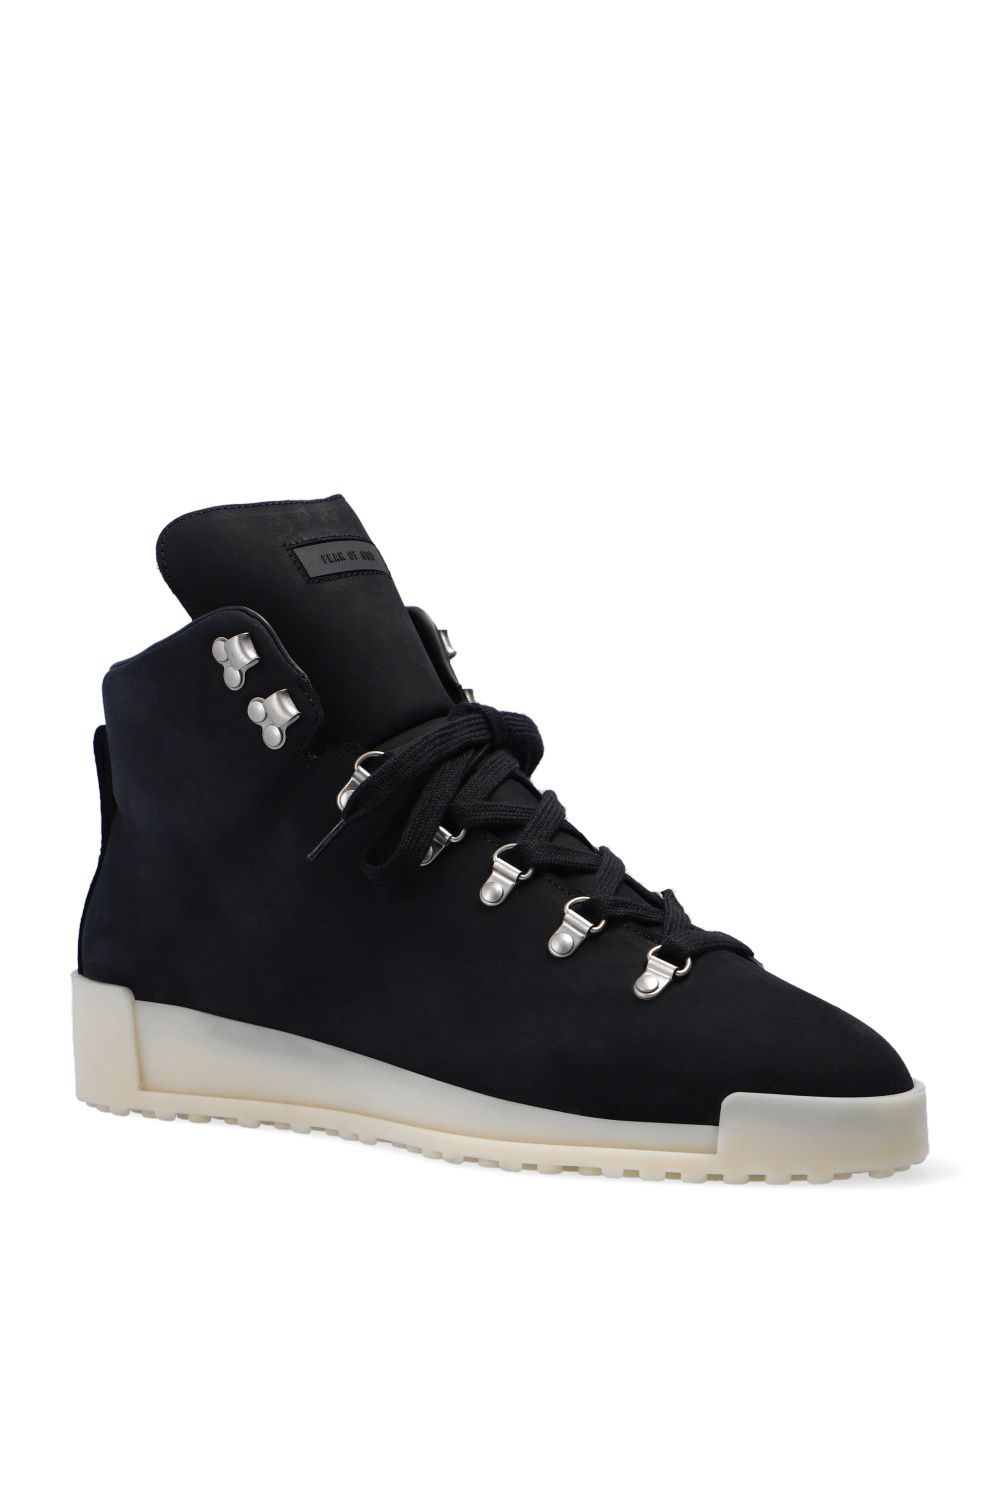 Sneakers ON Cloud Hi 2899174 Forest 346 ‘7th Hiker’ boots